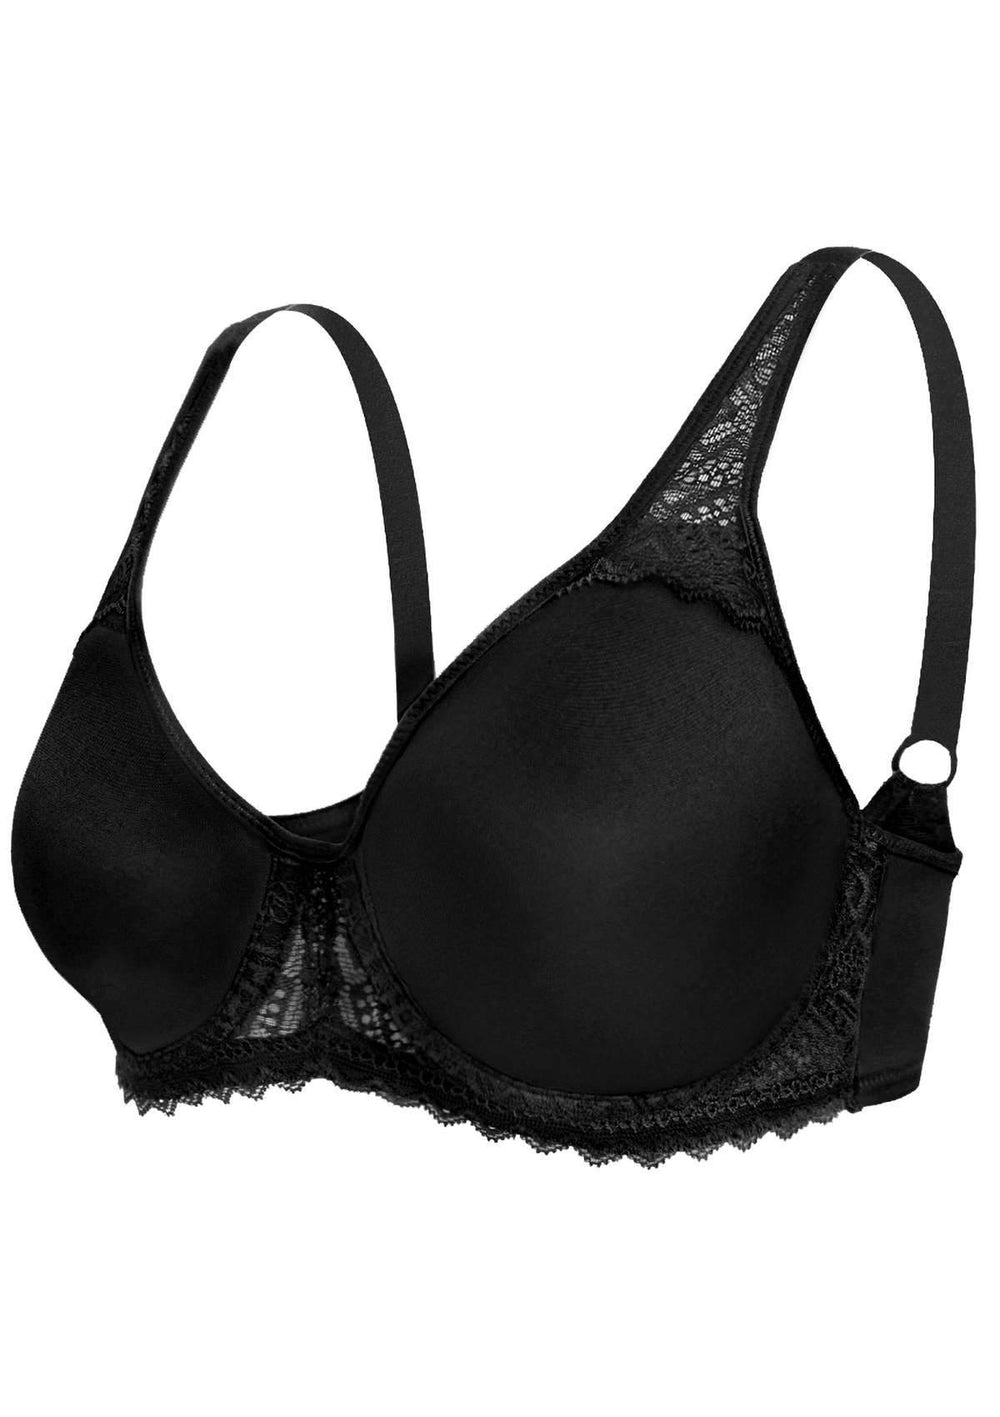 HSIA Plus Size Bras for Women Full Coverage Back Fat Underwire Unlined Bras  Black 42C